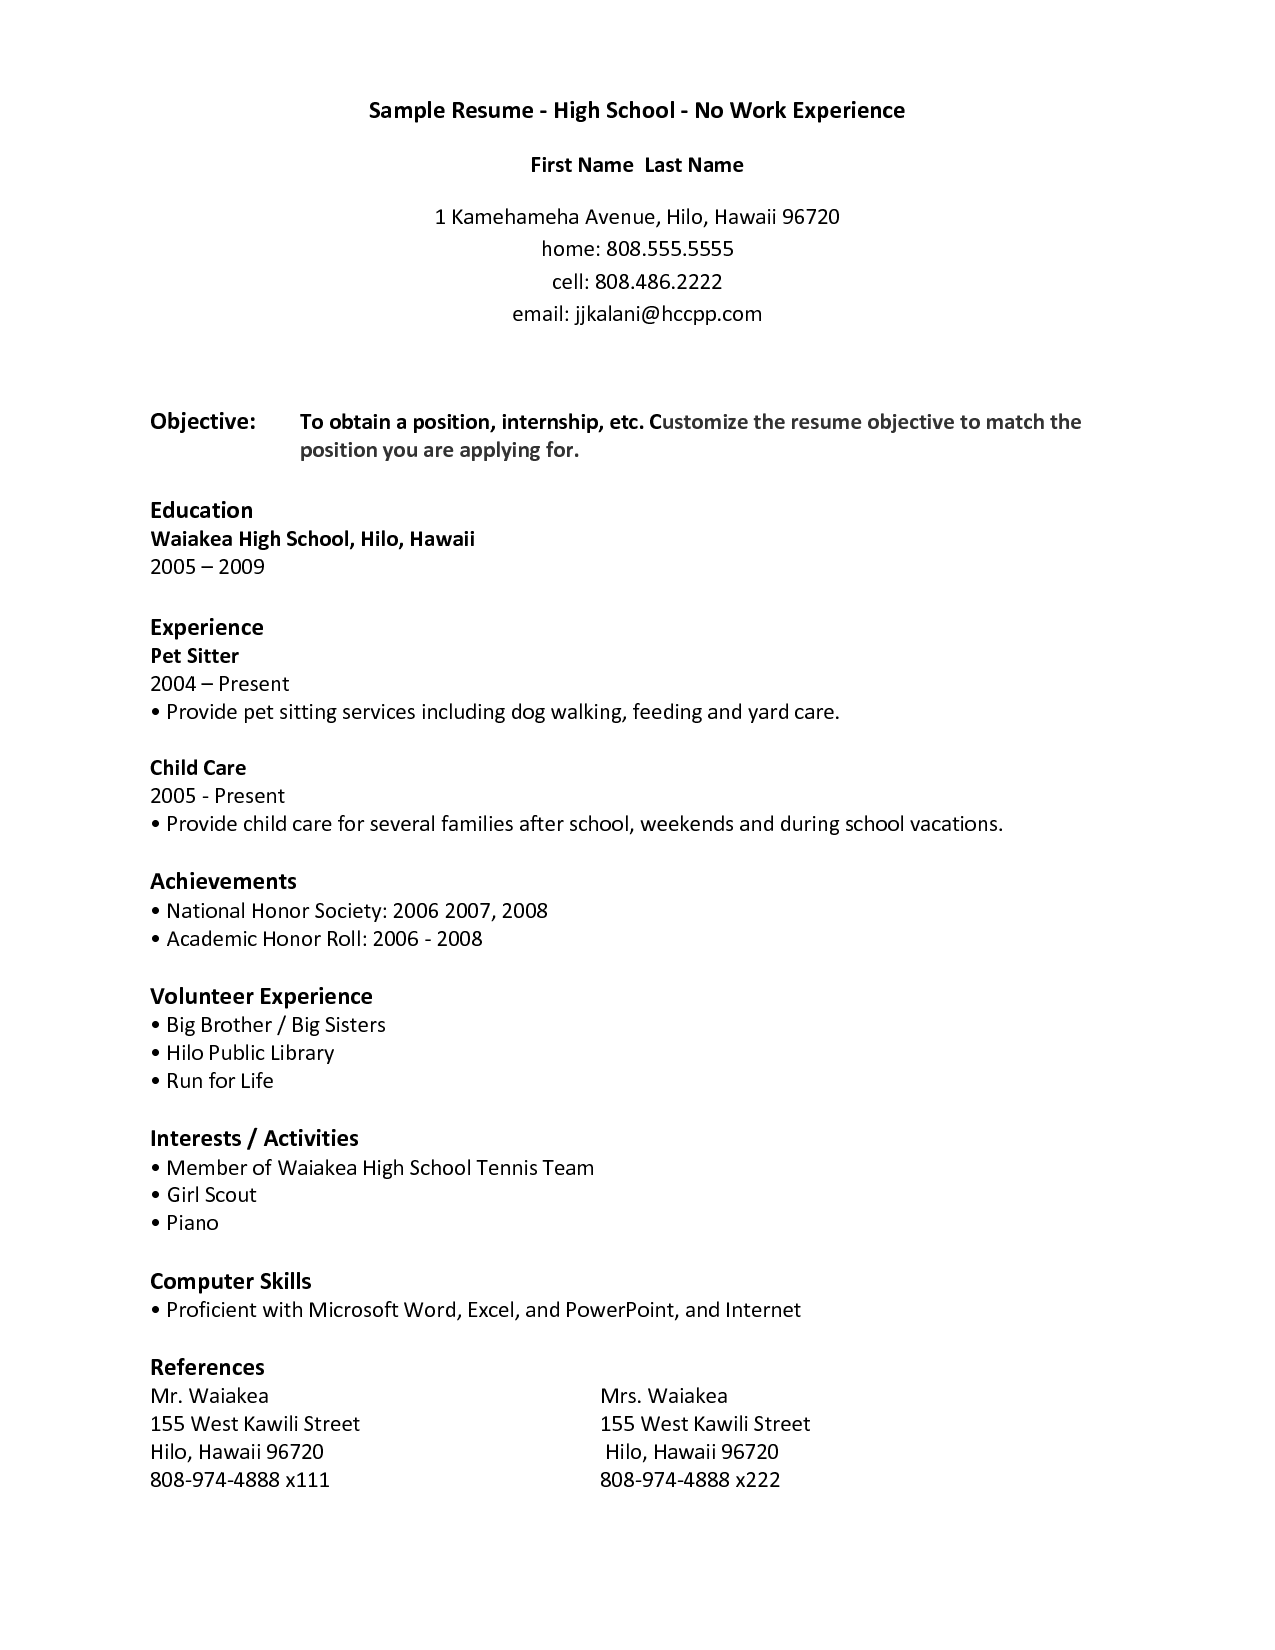 Resume Examples Little Work Experience First job resume, Job resume